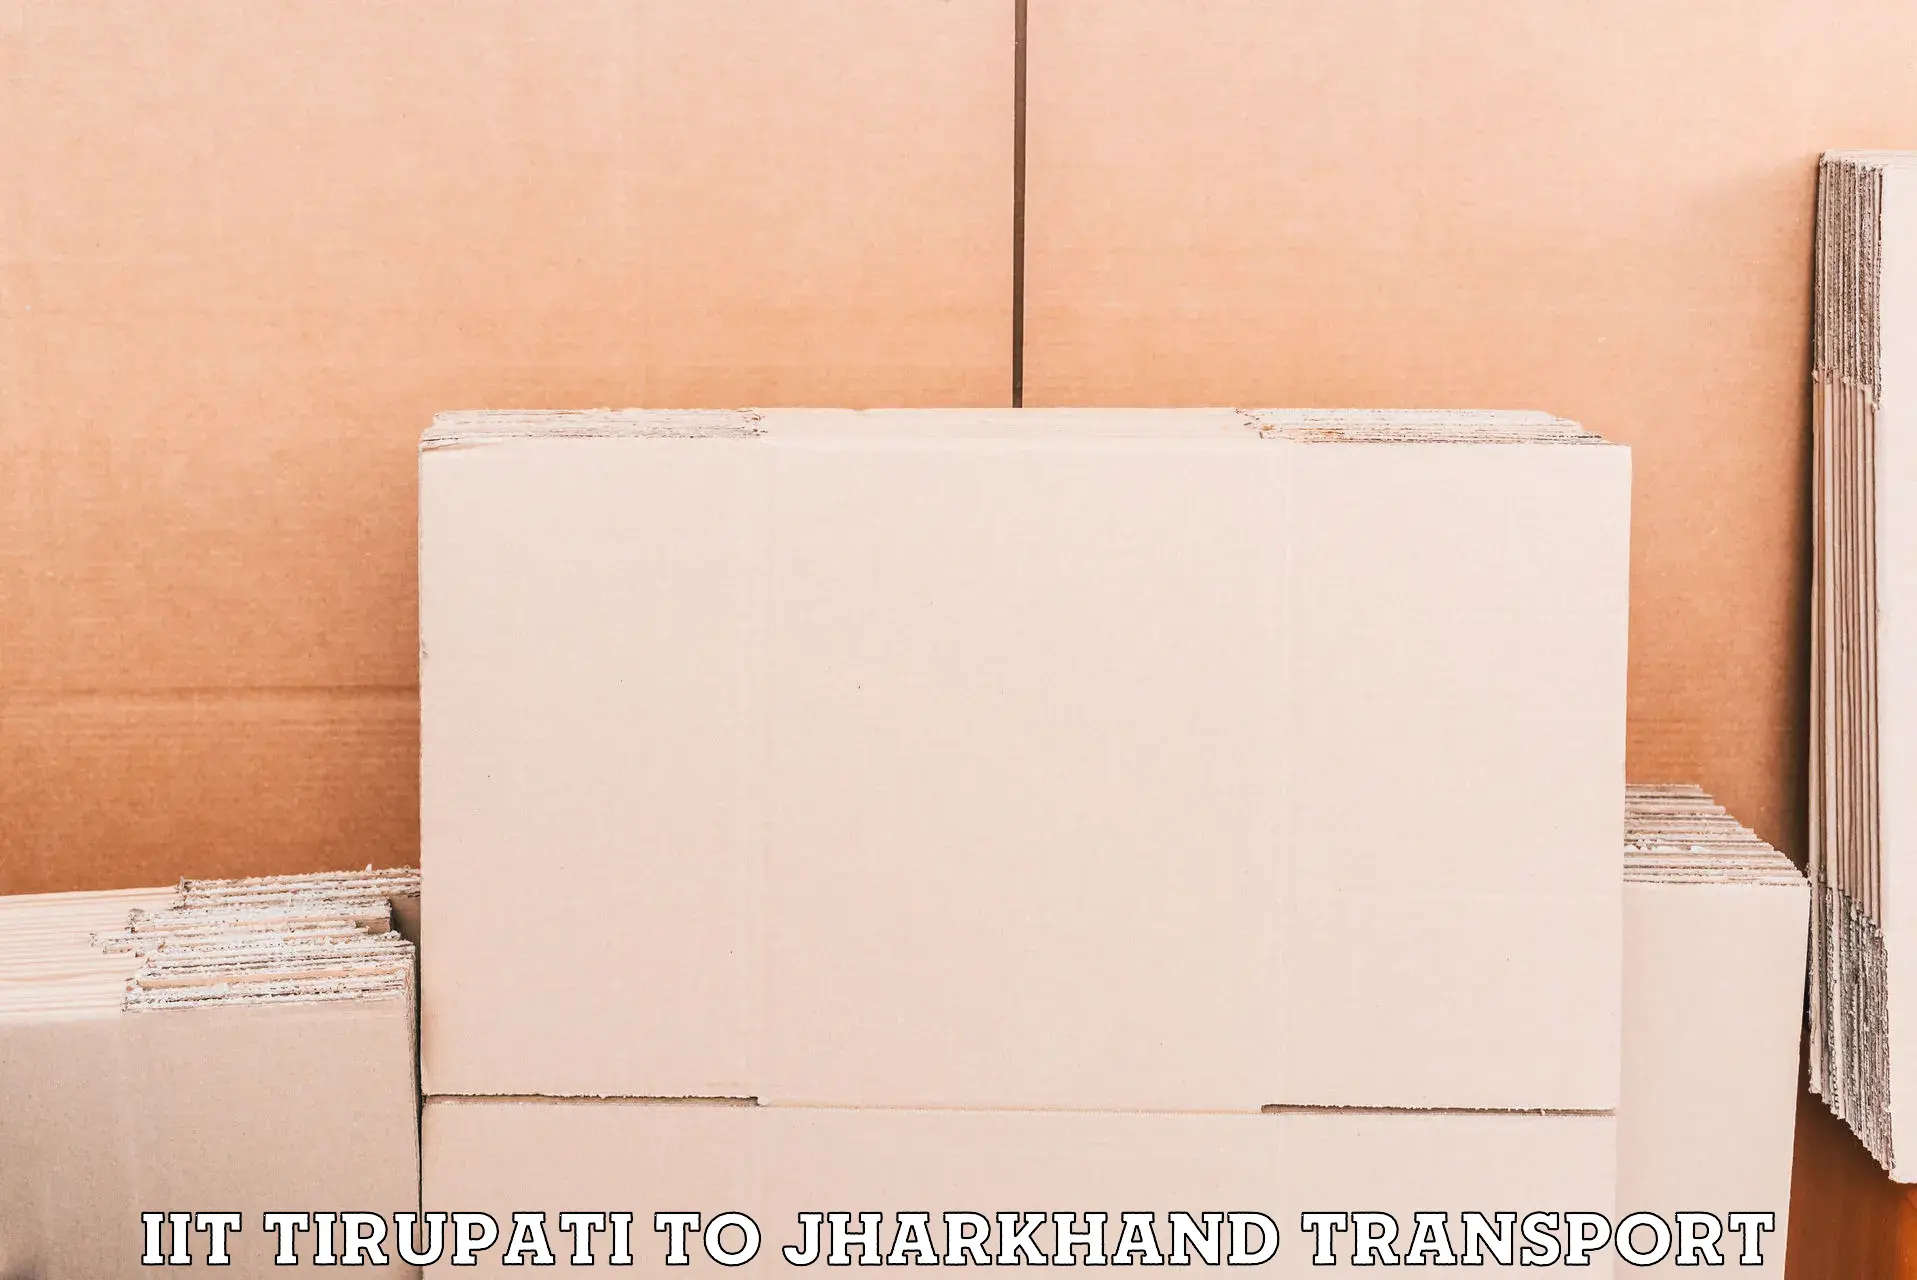 Commercial transport service IIT Tirupati to Jharkhand